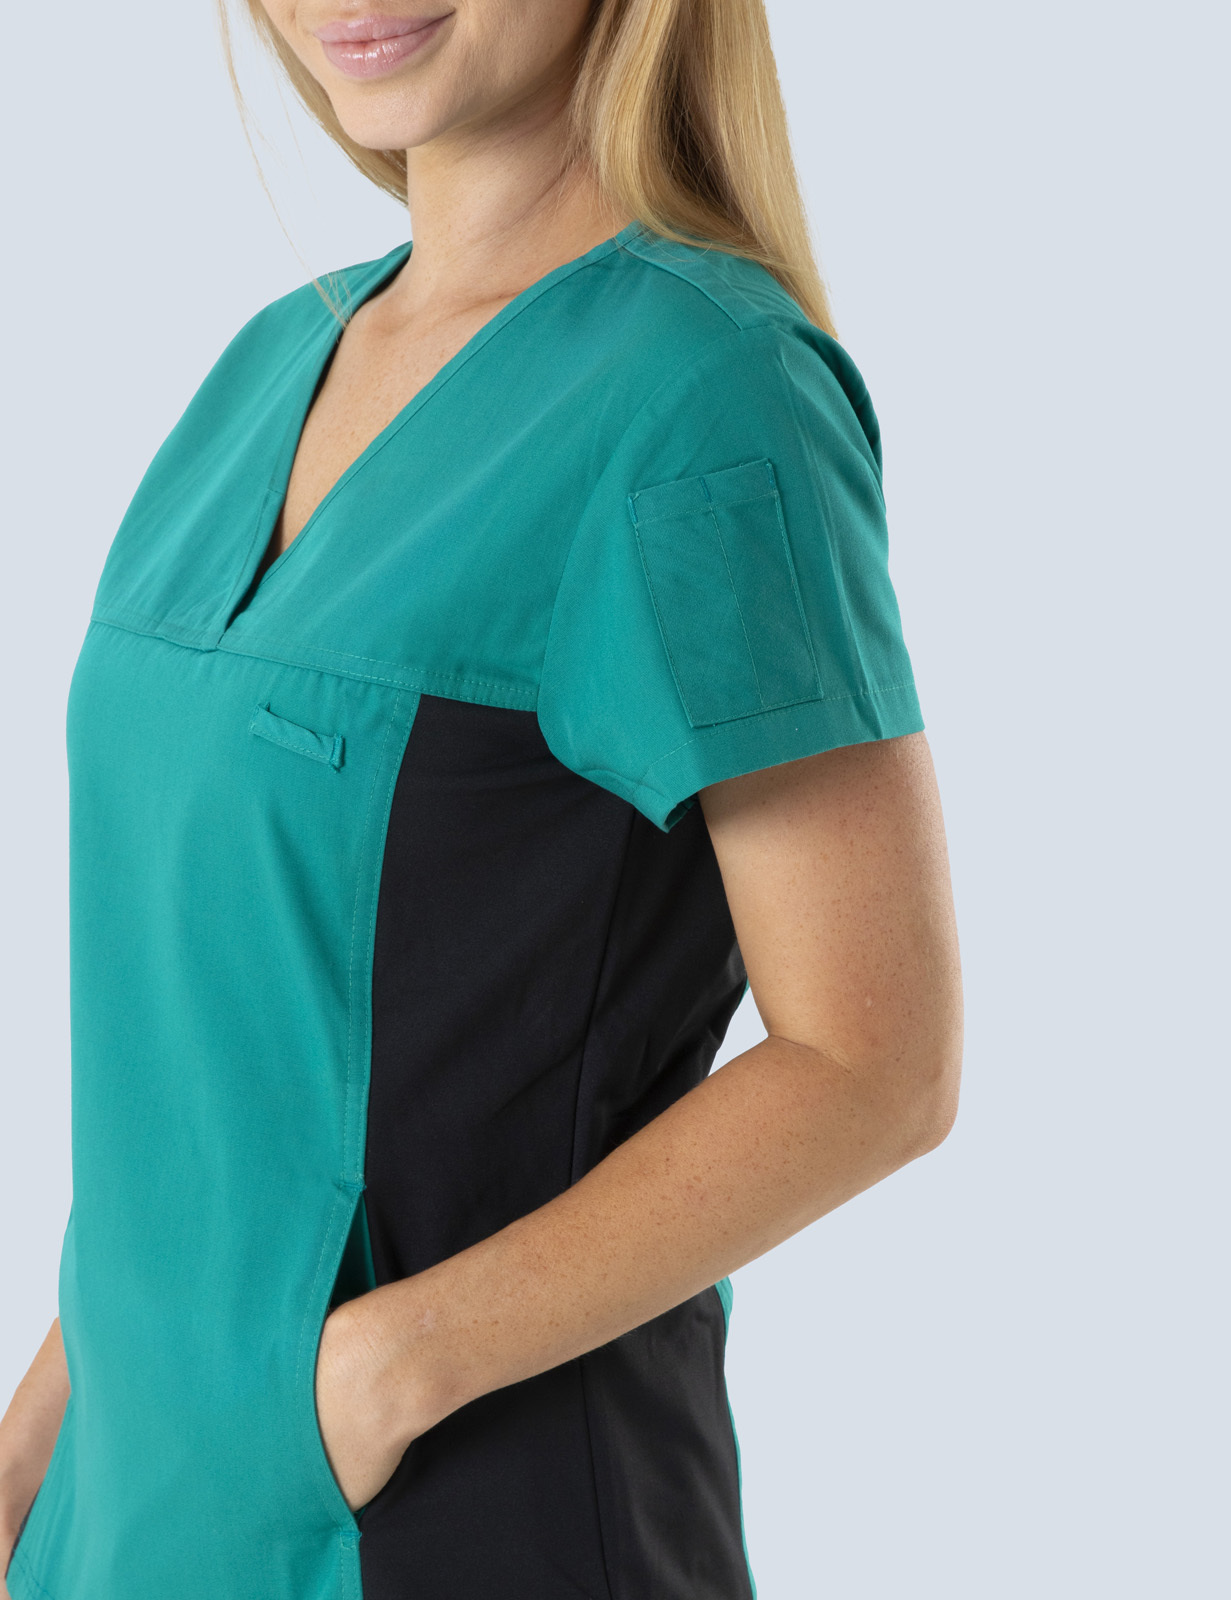 Women's Fit Solid Scrub Top With Spandex Panel - Hunter - X Small